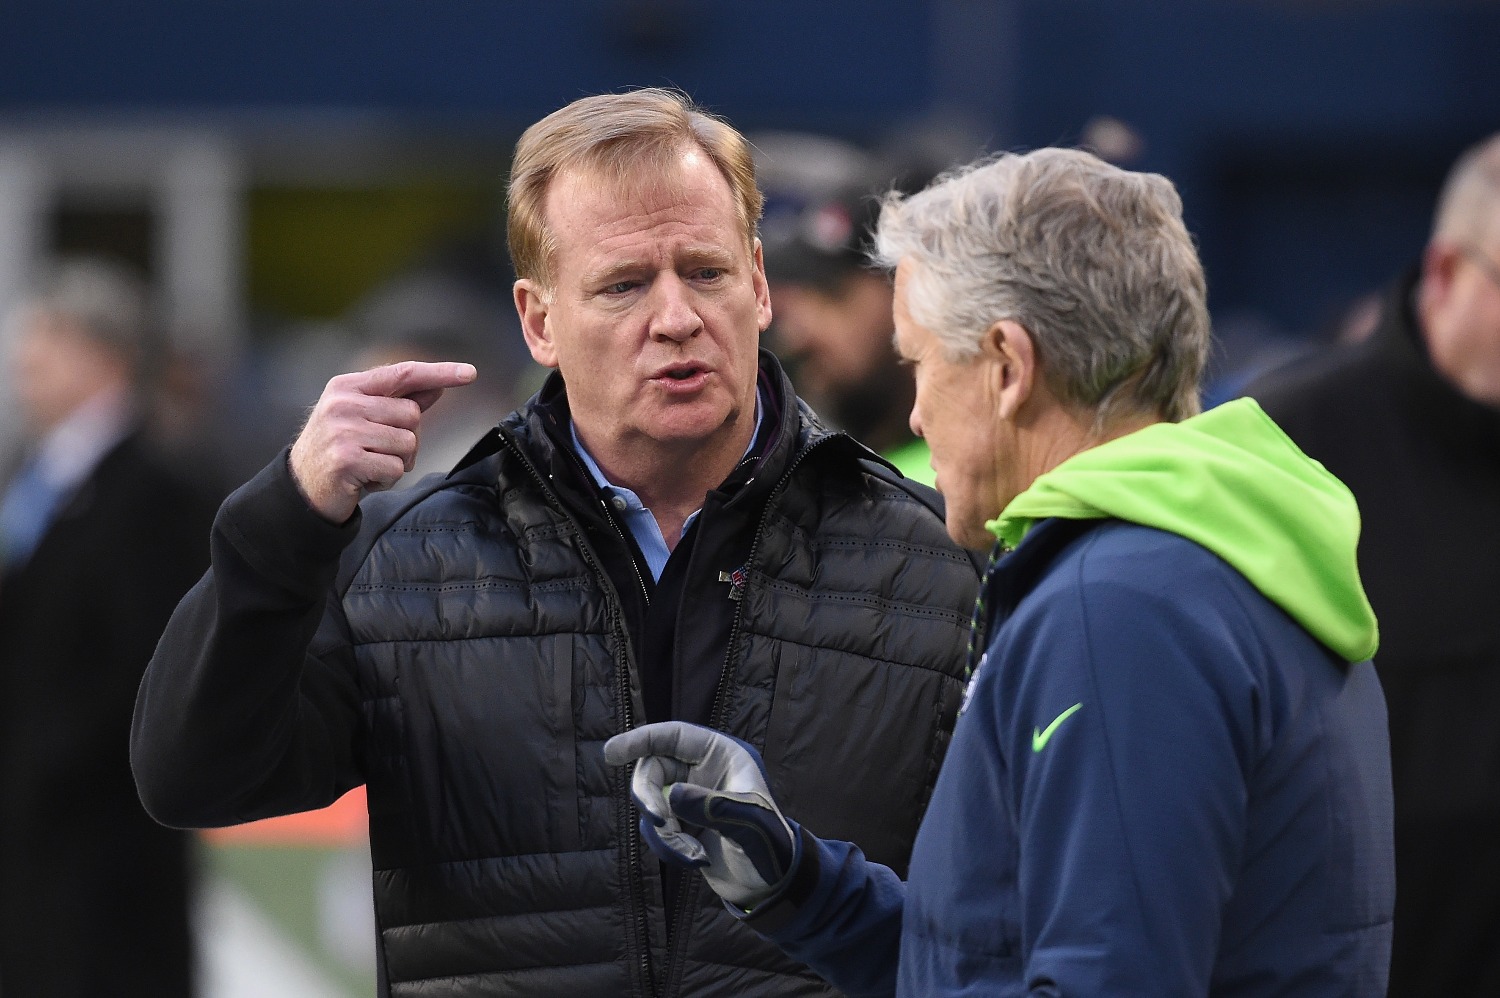 Roger Goodell Just Taught 5 NFL Coaches an Expensive Lesson on Wearing Masks